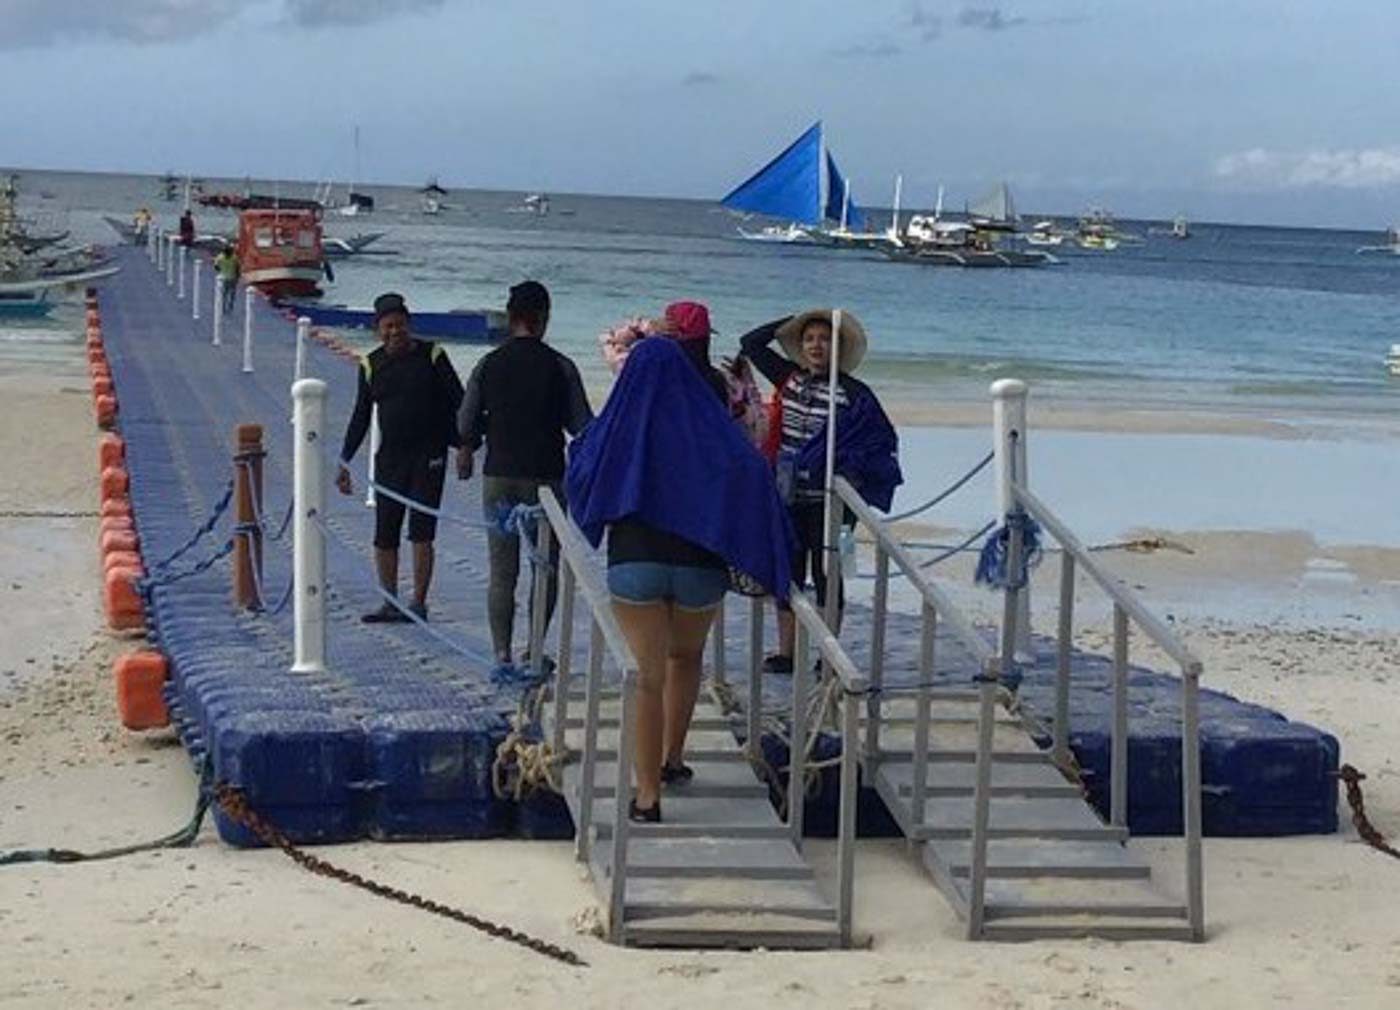 Foreign tourists stranded in Boracay due to lockdown, restrictions